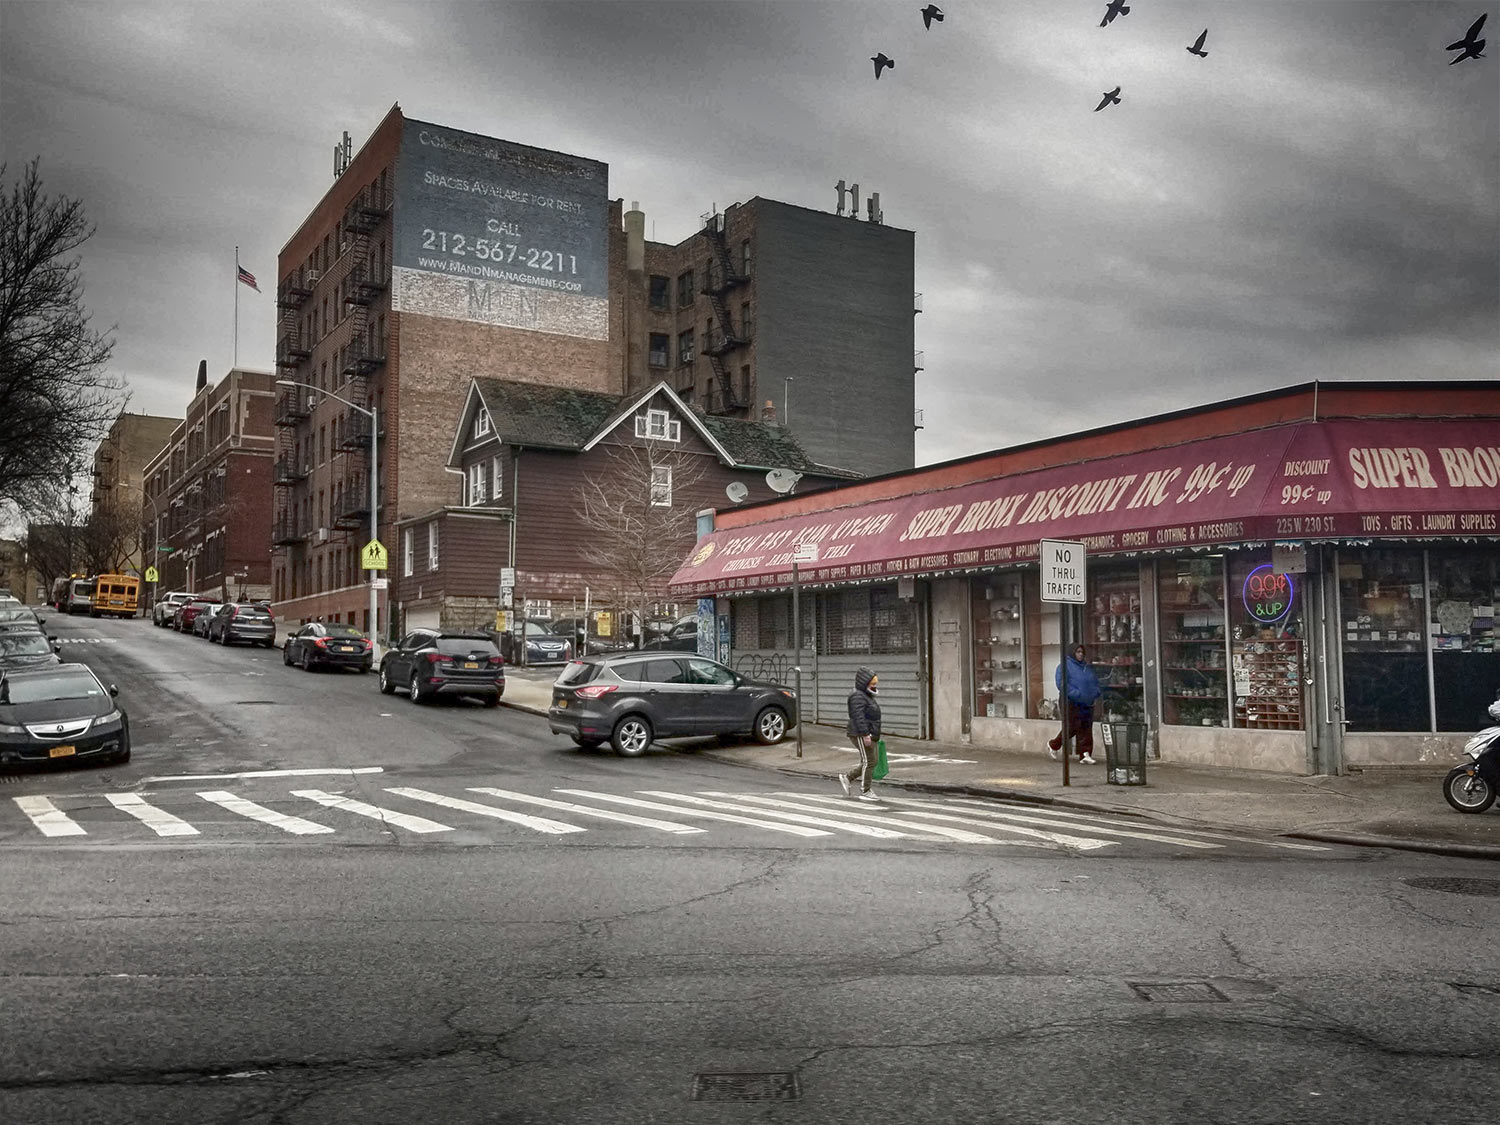 99 cent store, bronx ©2021 by bret wills